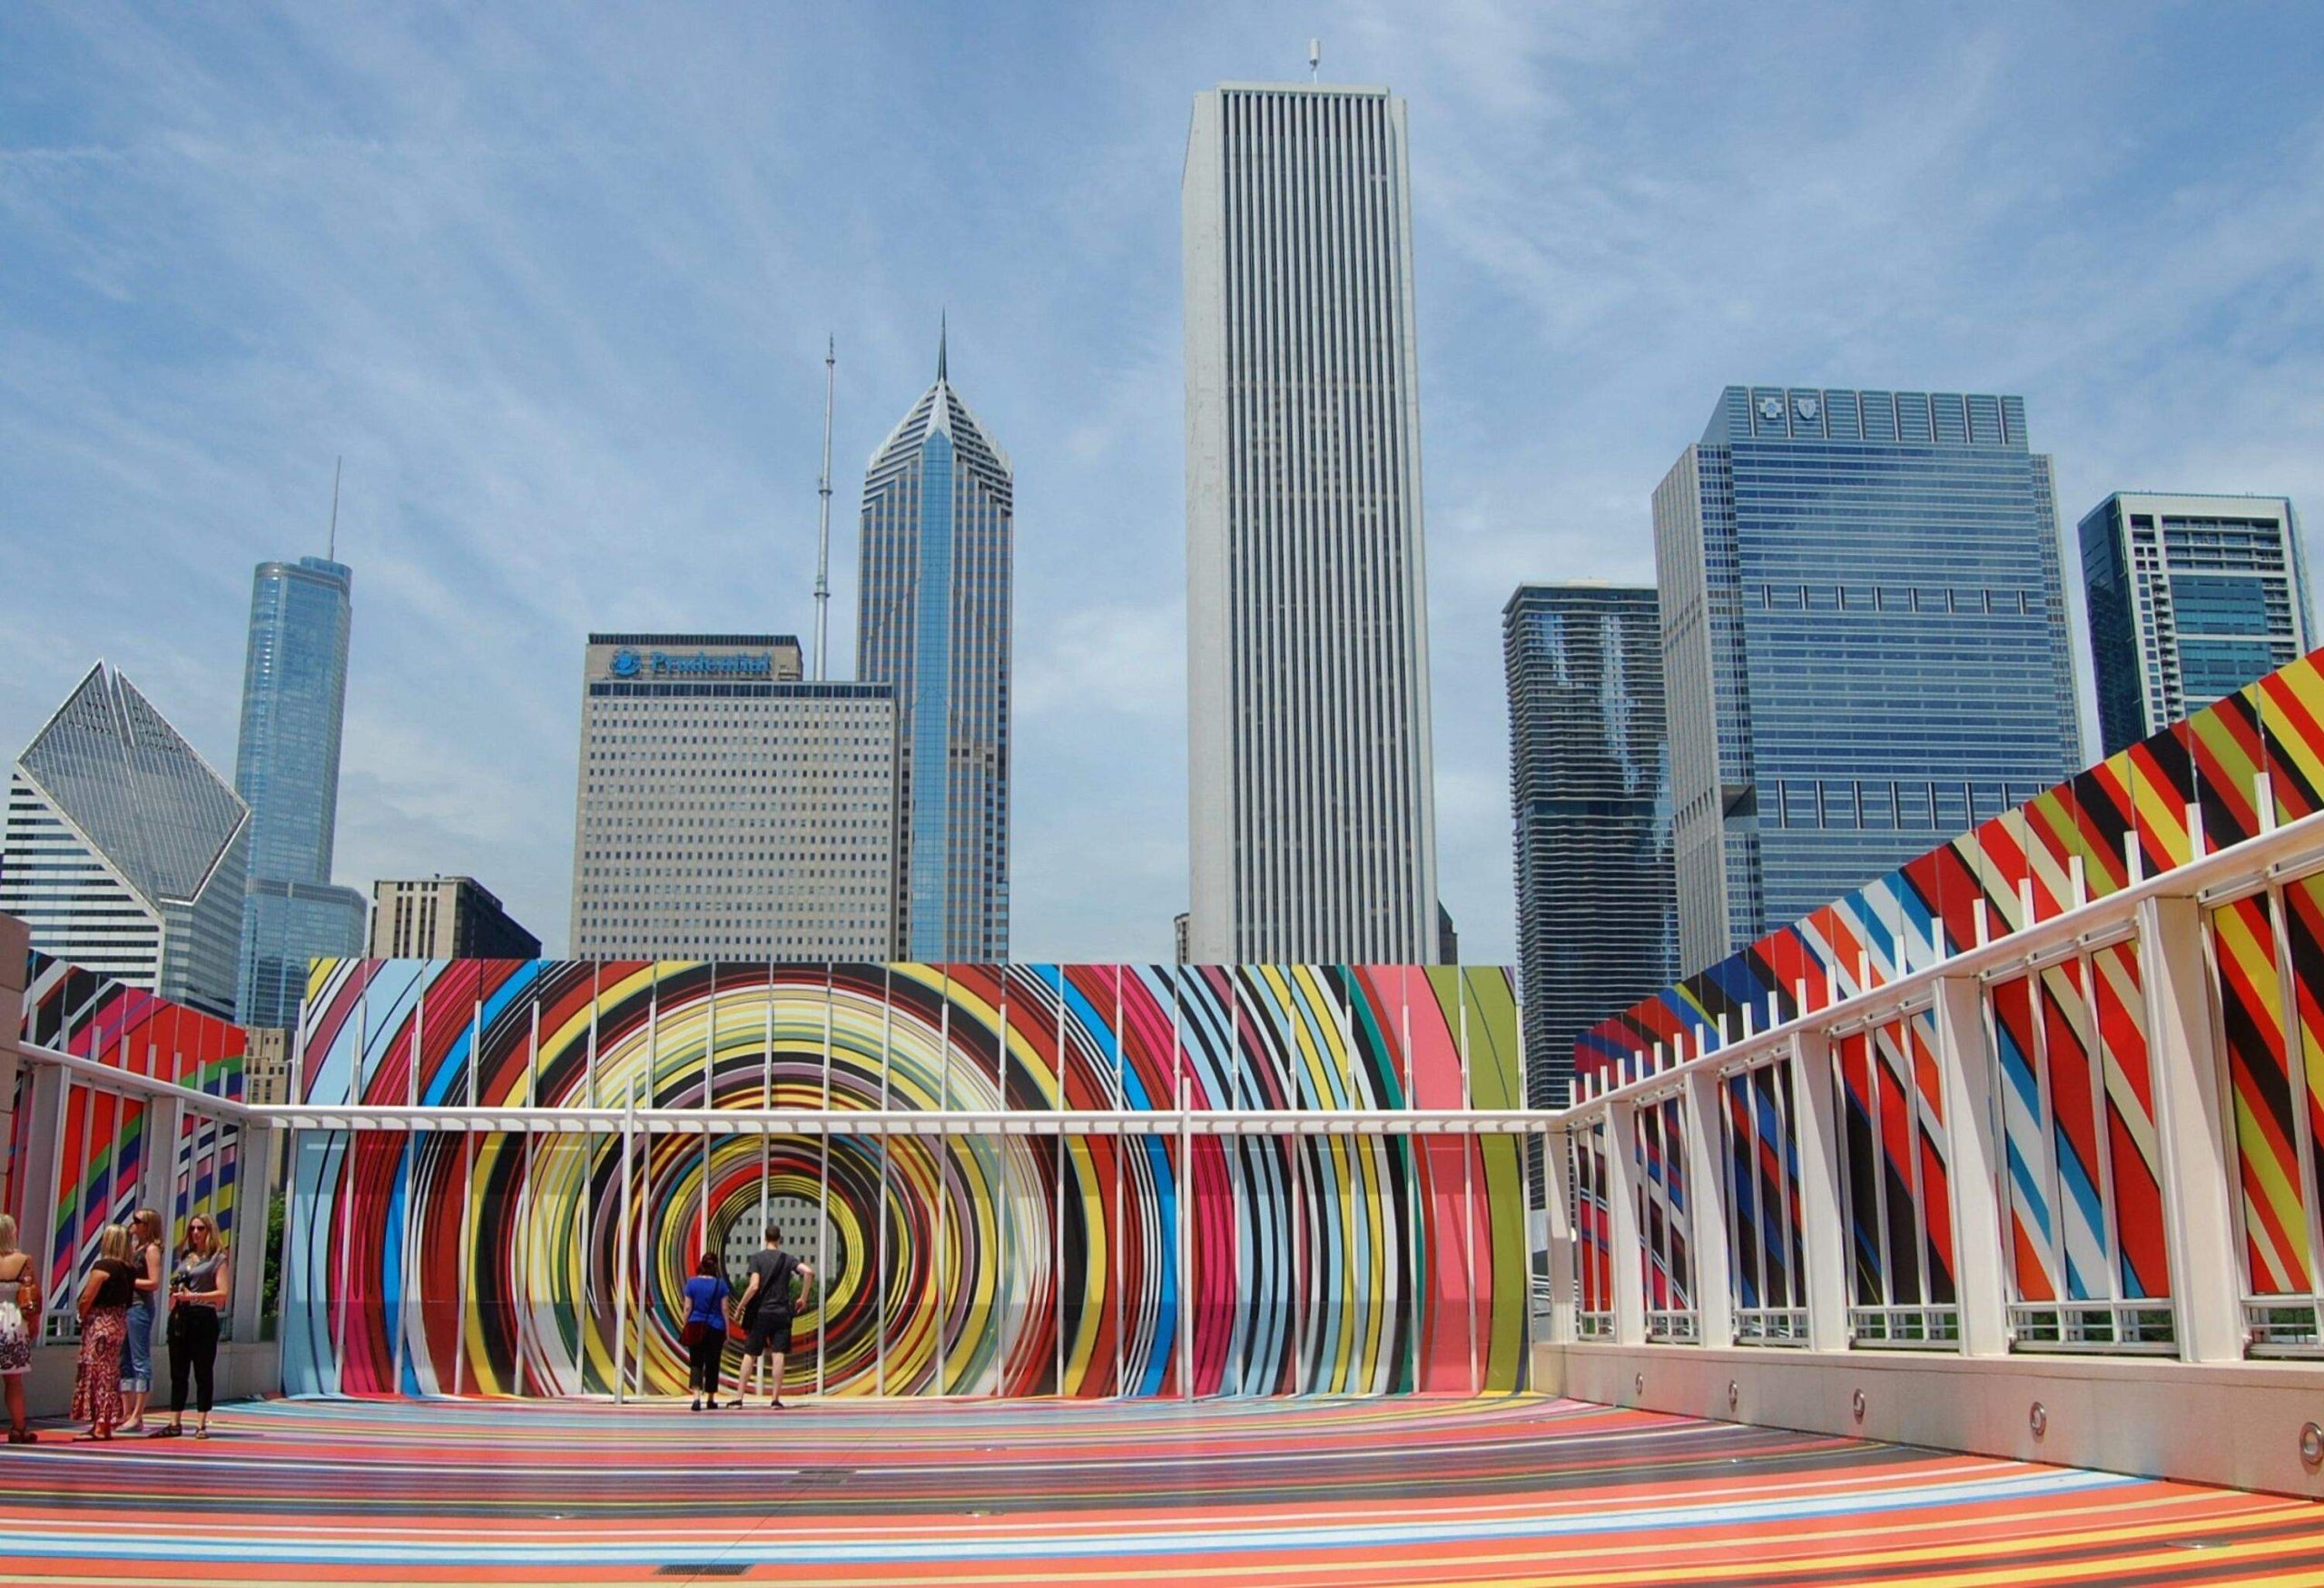 People in an open area with colourful spiral art against the modern towering skyscrapers in the background.